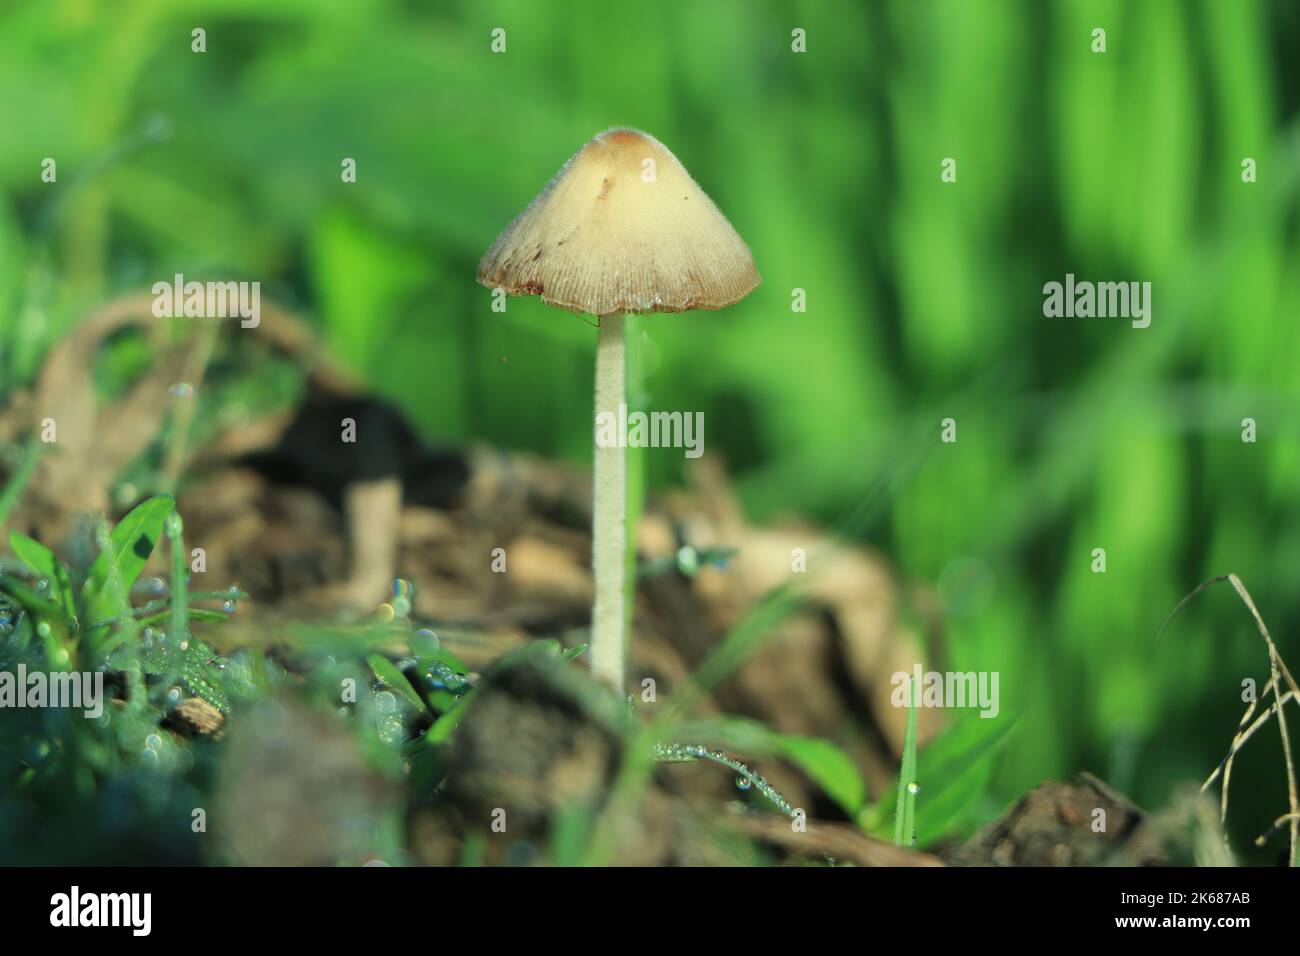 Warm white glowing mushrooms looking as bedroom lamps, fantasy background Stock Photo